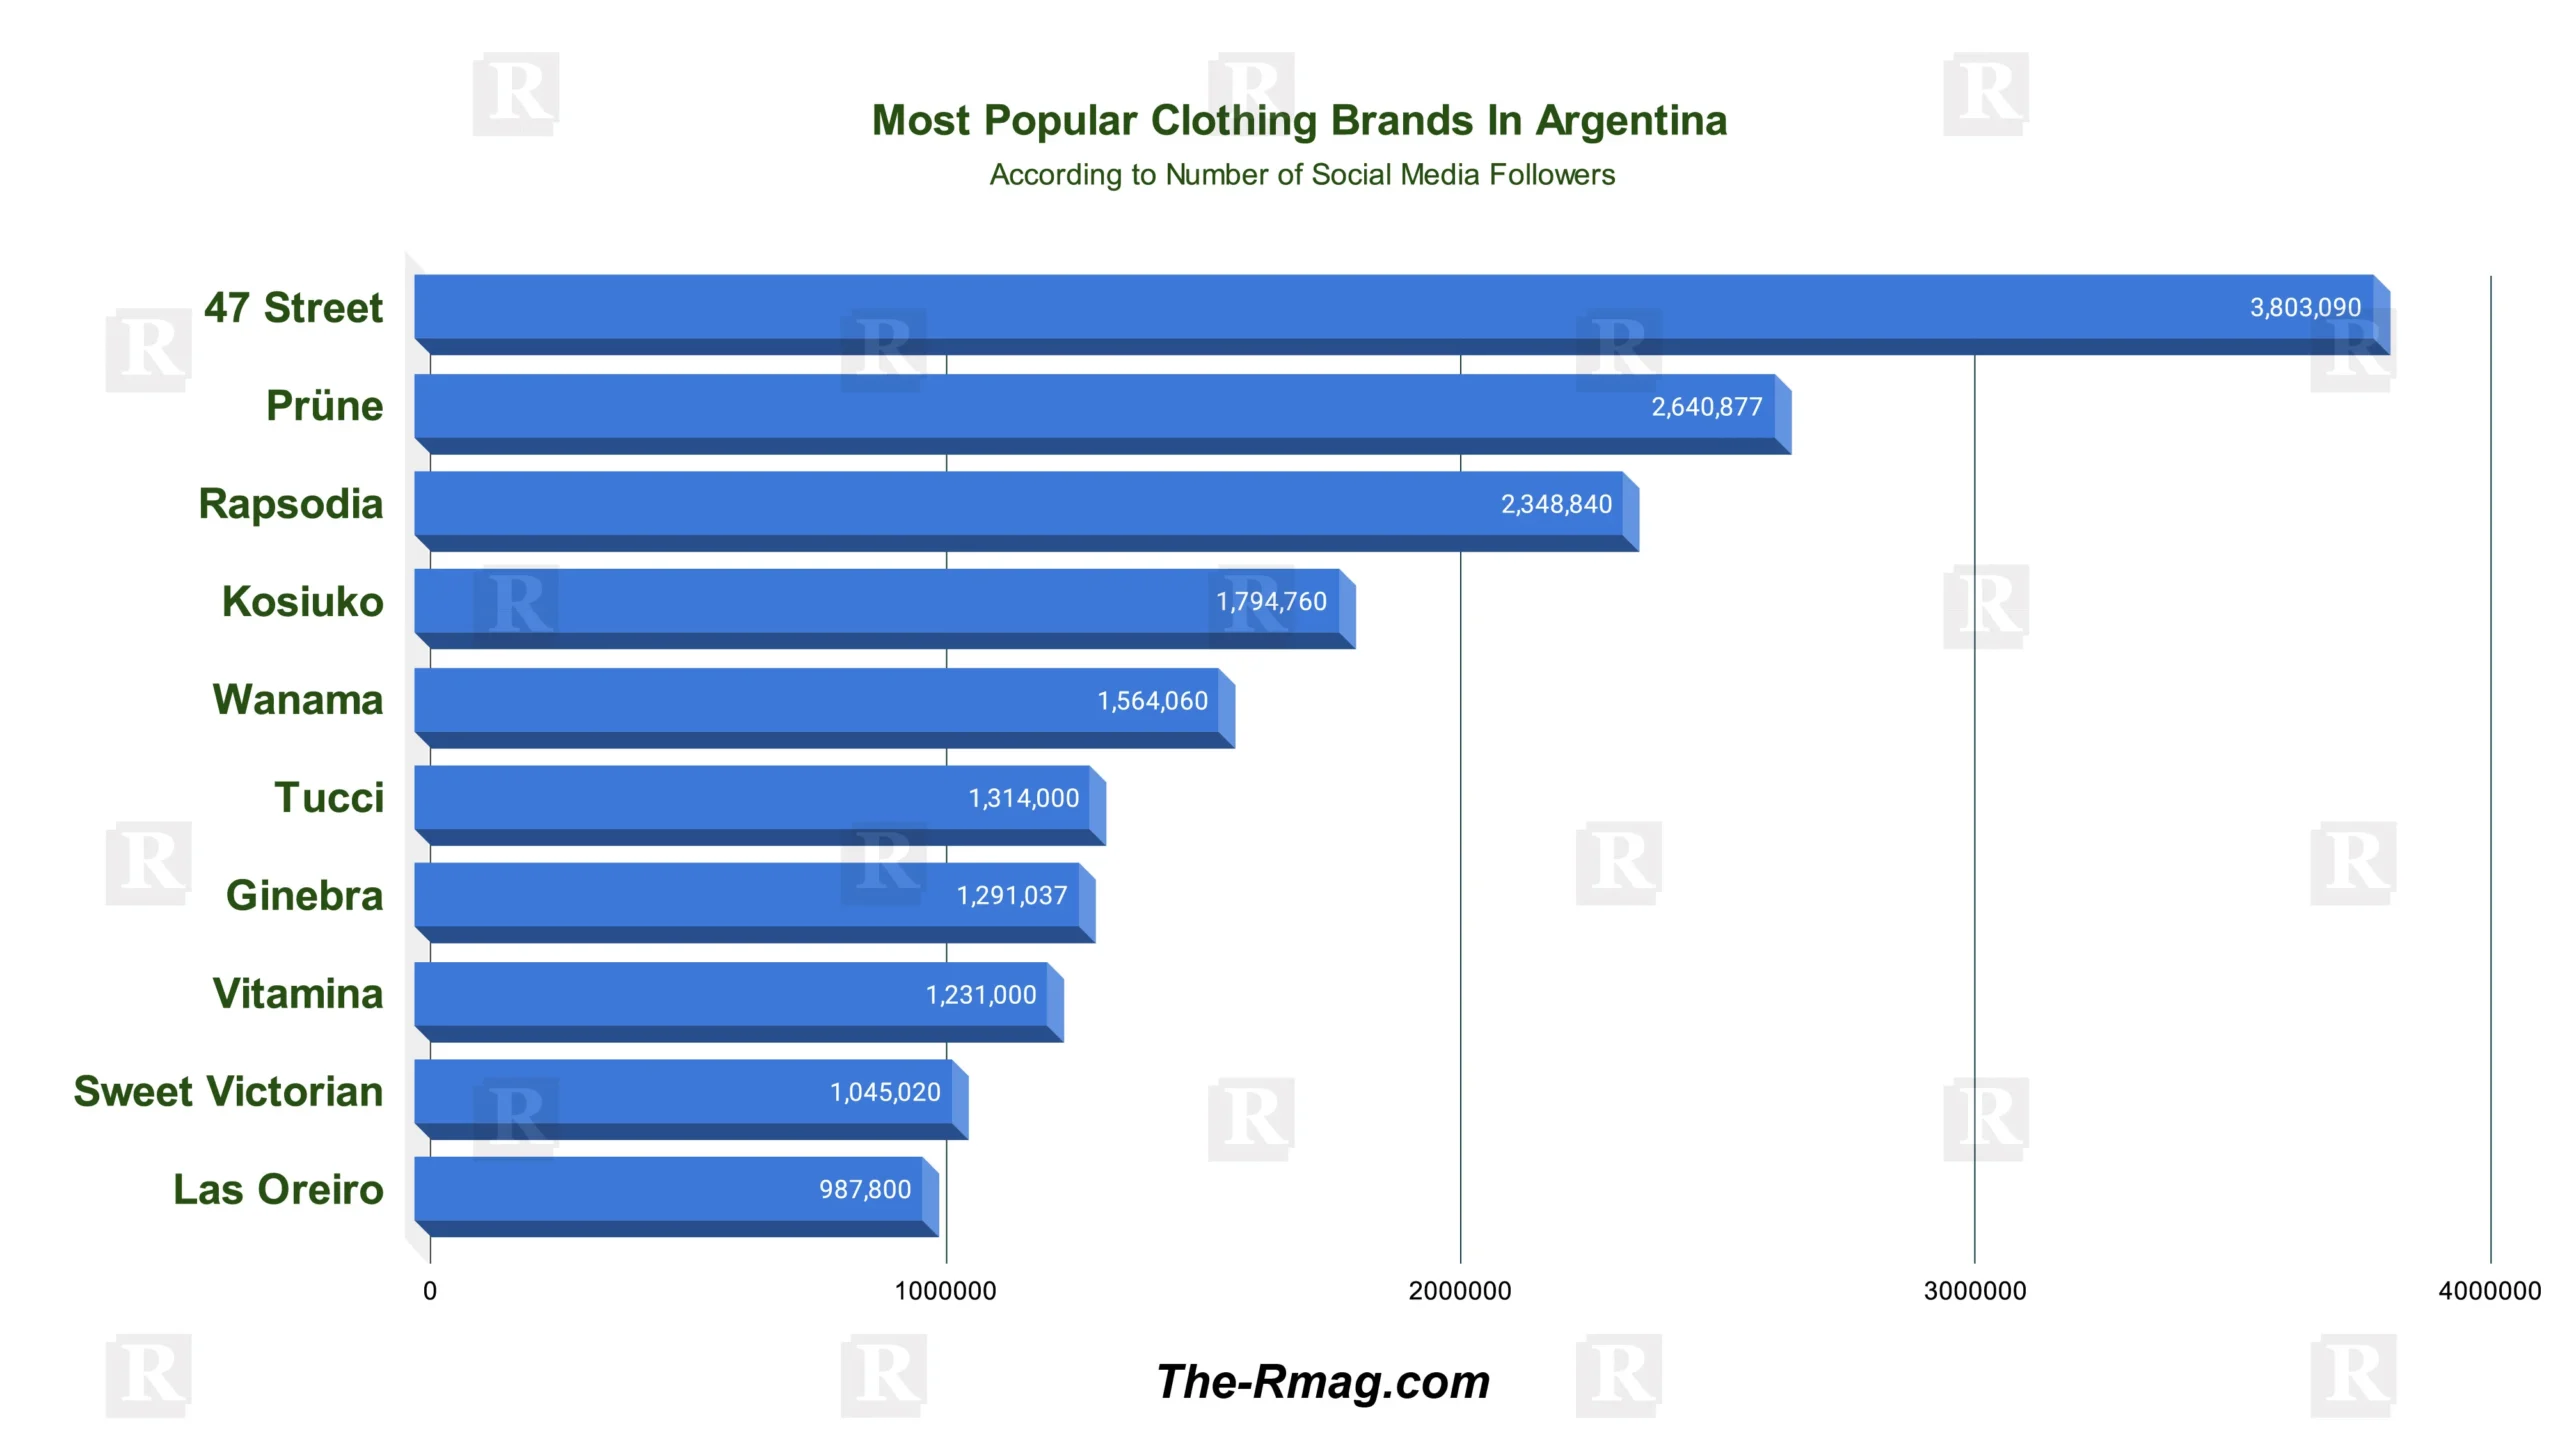 Tango in Threads: A Guide to 10 Most Popular Clothing Brands in Argentina